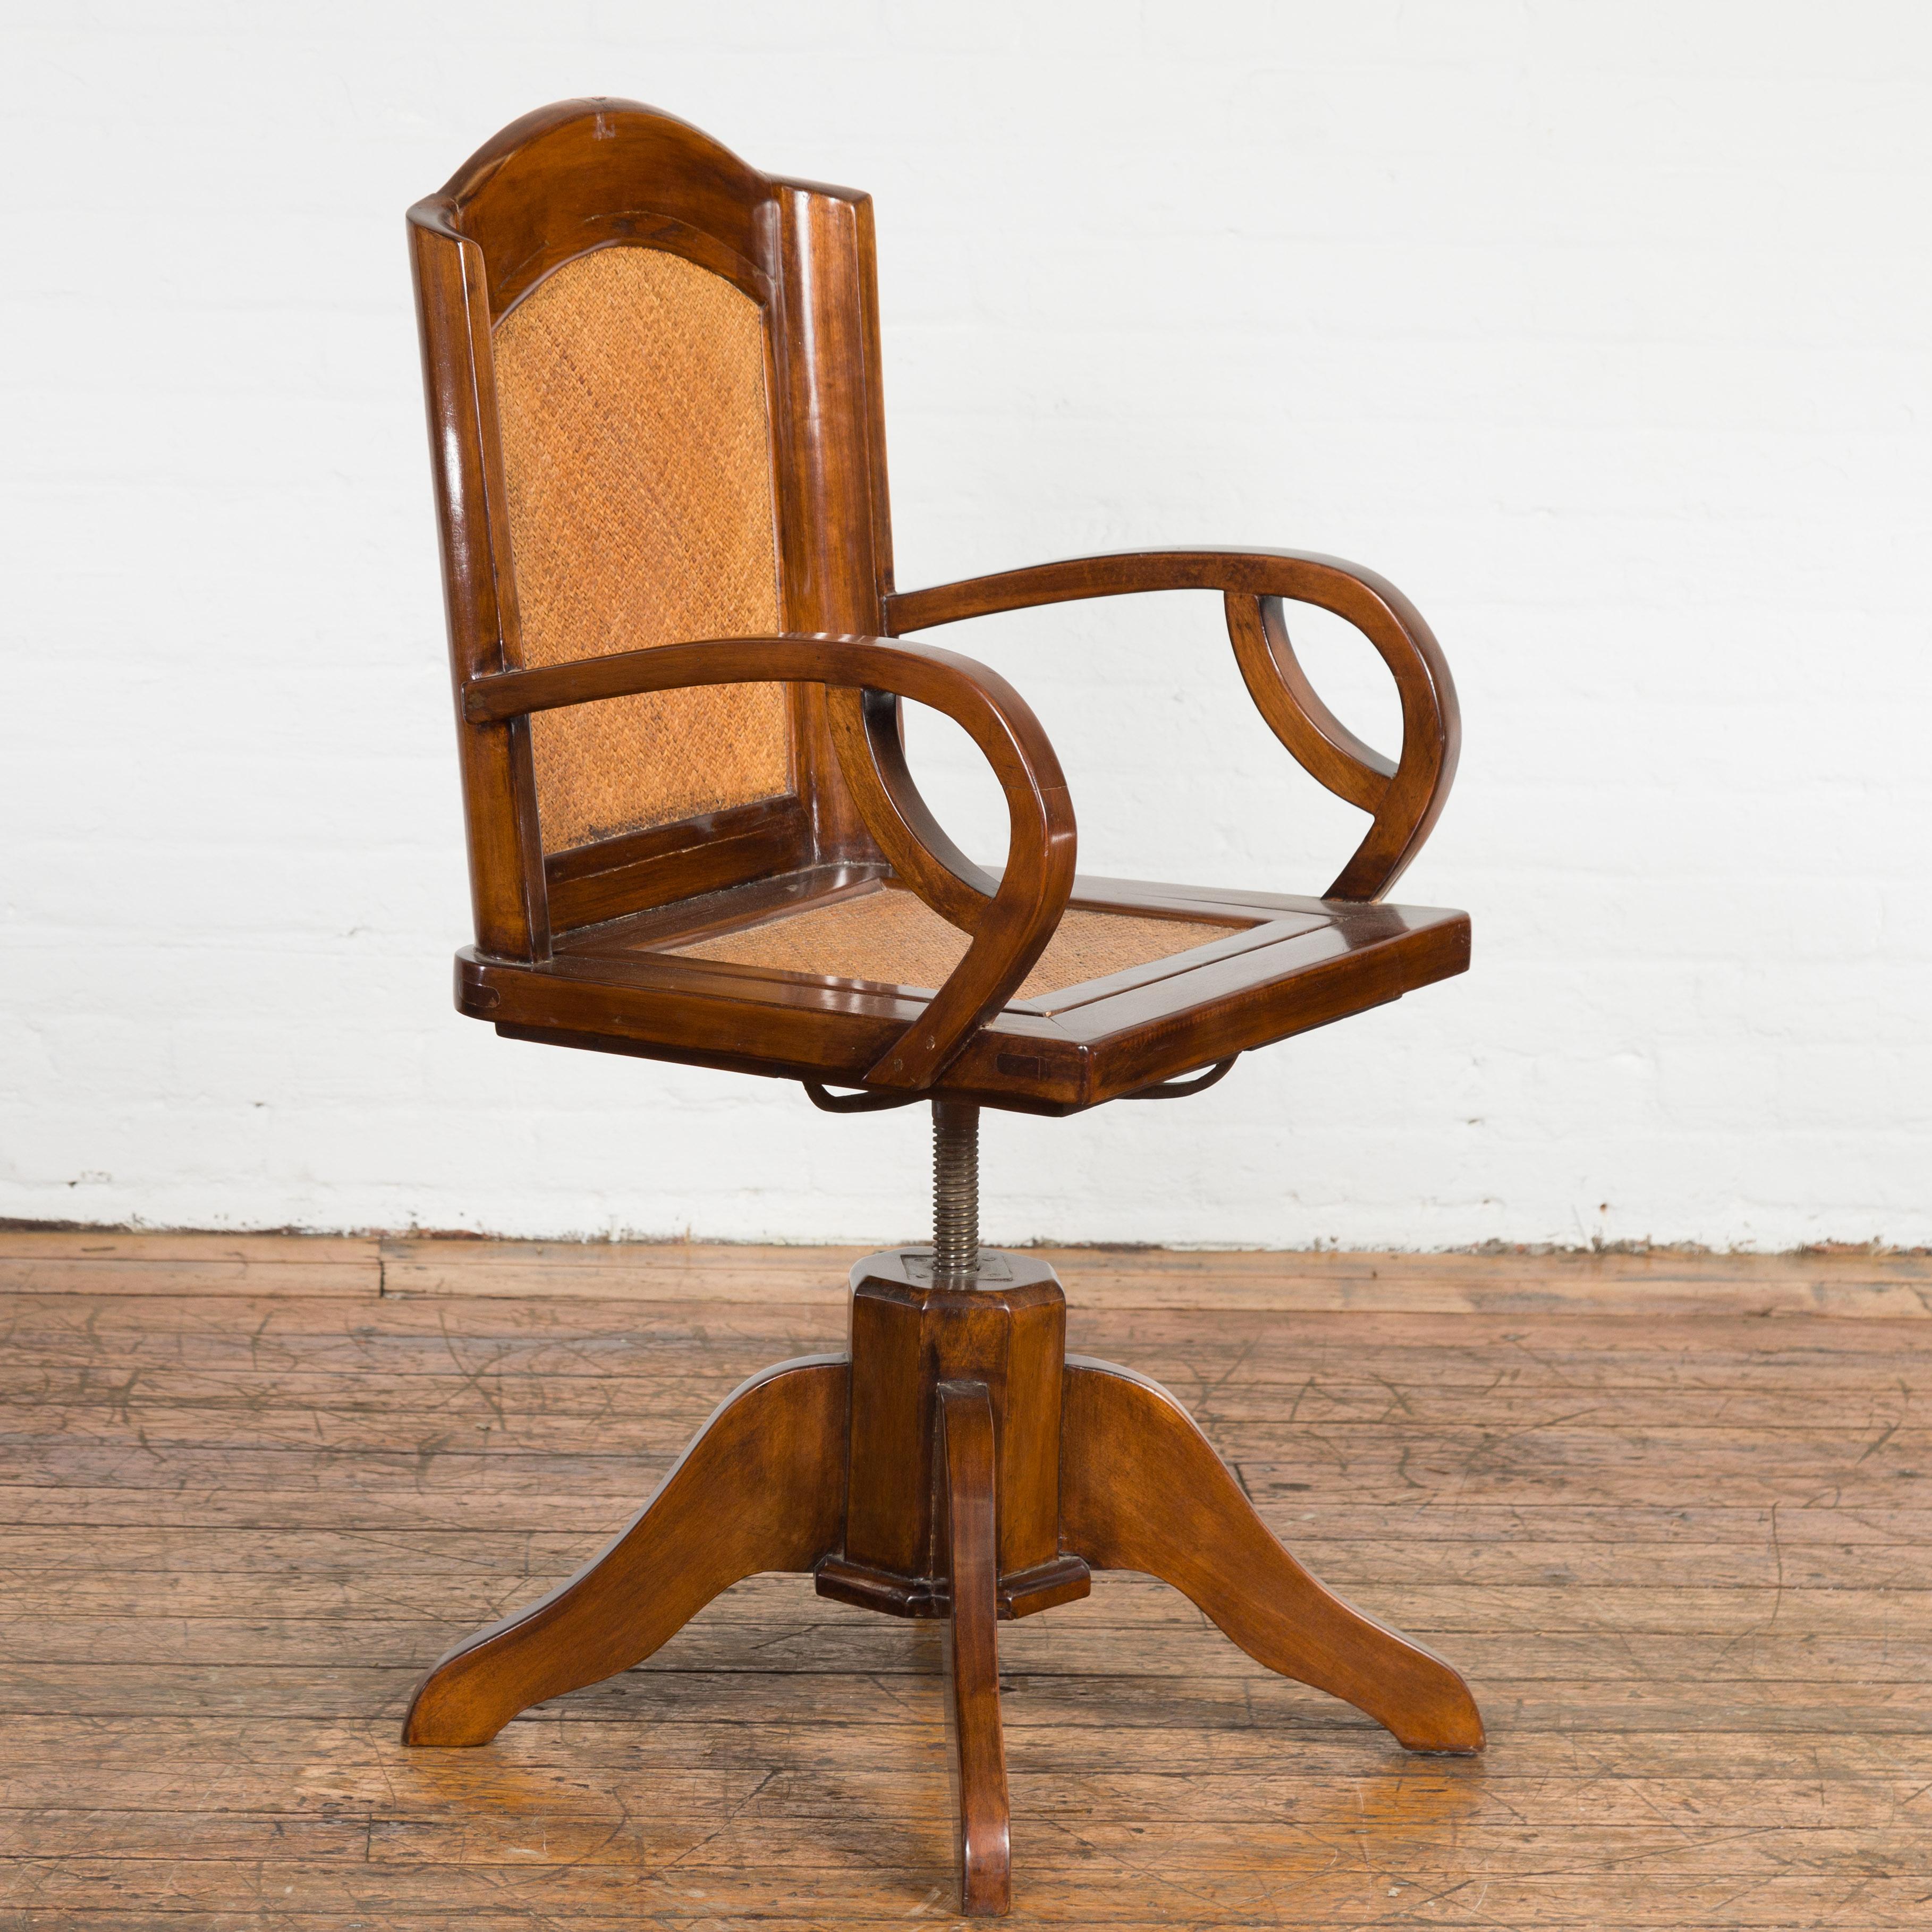 Carved 1940s Art Deco Style Swivel Desk Chair with Woven Rattan and Loop Arms For Sale